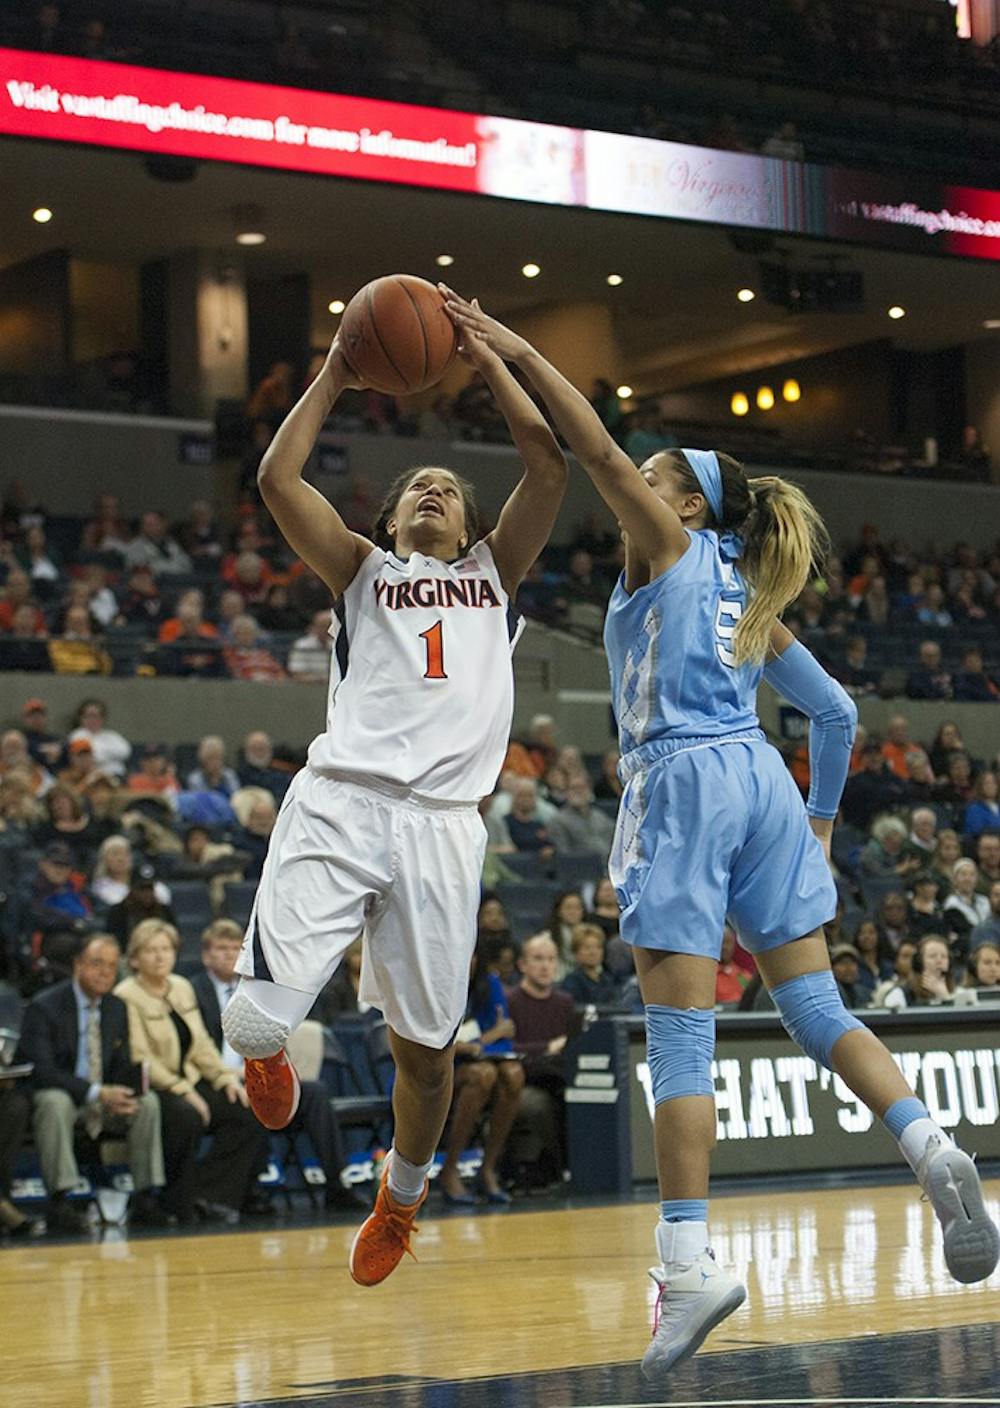 <p>Sophomore guard MiKayla Venson scored 16 in Virginia's regular-season finale. The Cavaliers dropped that game to Virginia Tech, but face Duke in the second round of the ACC Tournament on Mar. 3.</p>